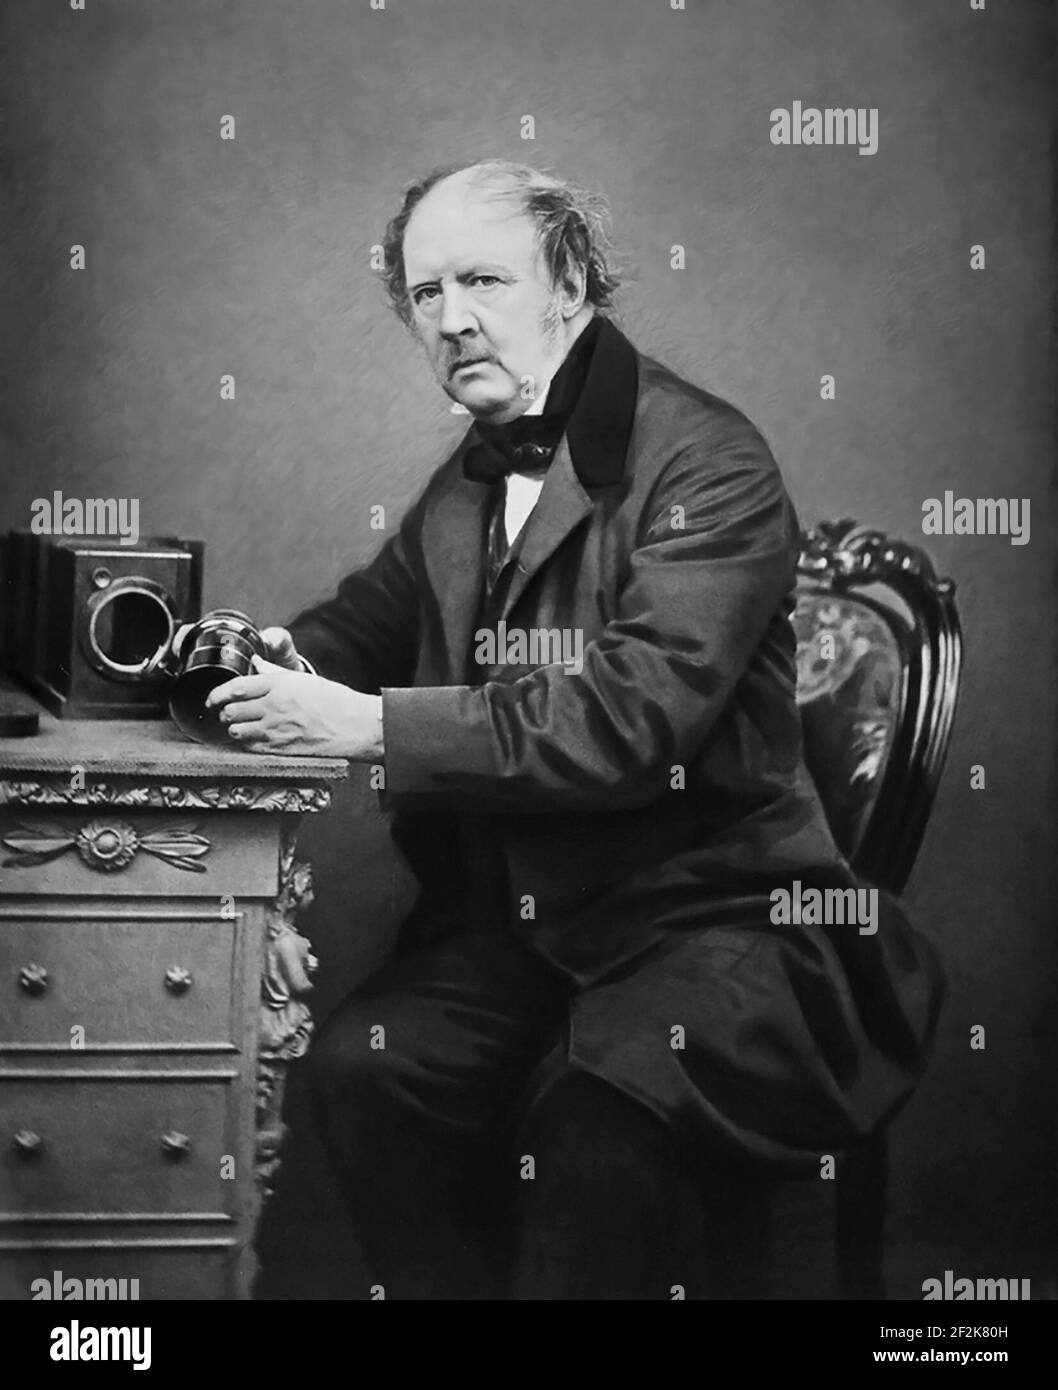 Fox Talbot. Portrait of the English scientist and inventor of photography, William Henry Fox Talbot (1800-1877) by John Moffat, 1864 Stock Photo